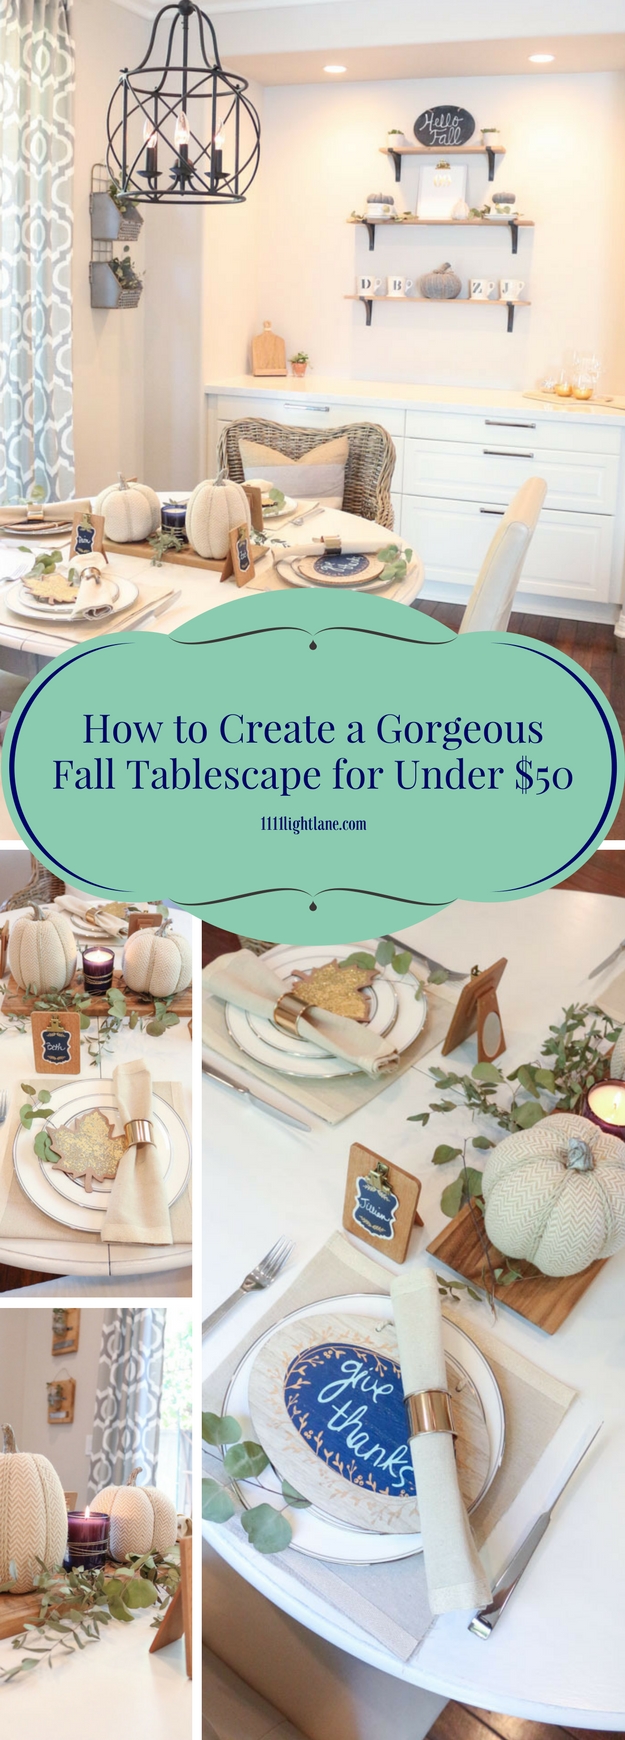 how-to-create-a-fall-tablescape-for-under-50